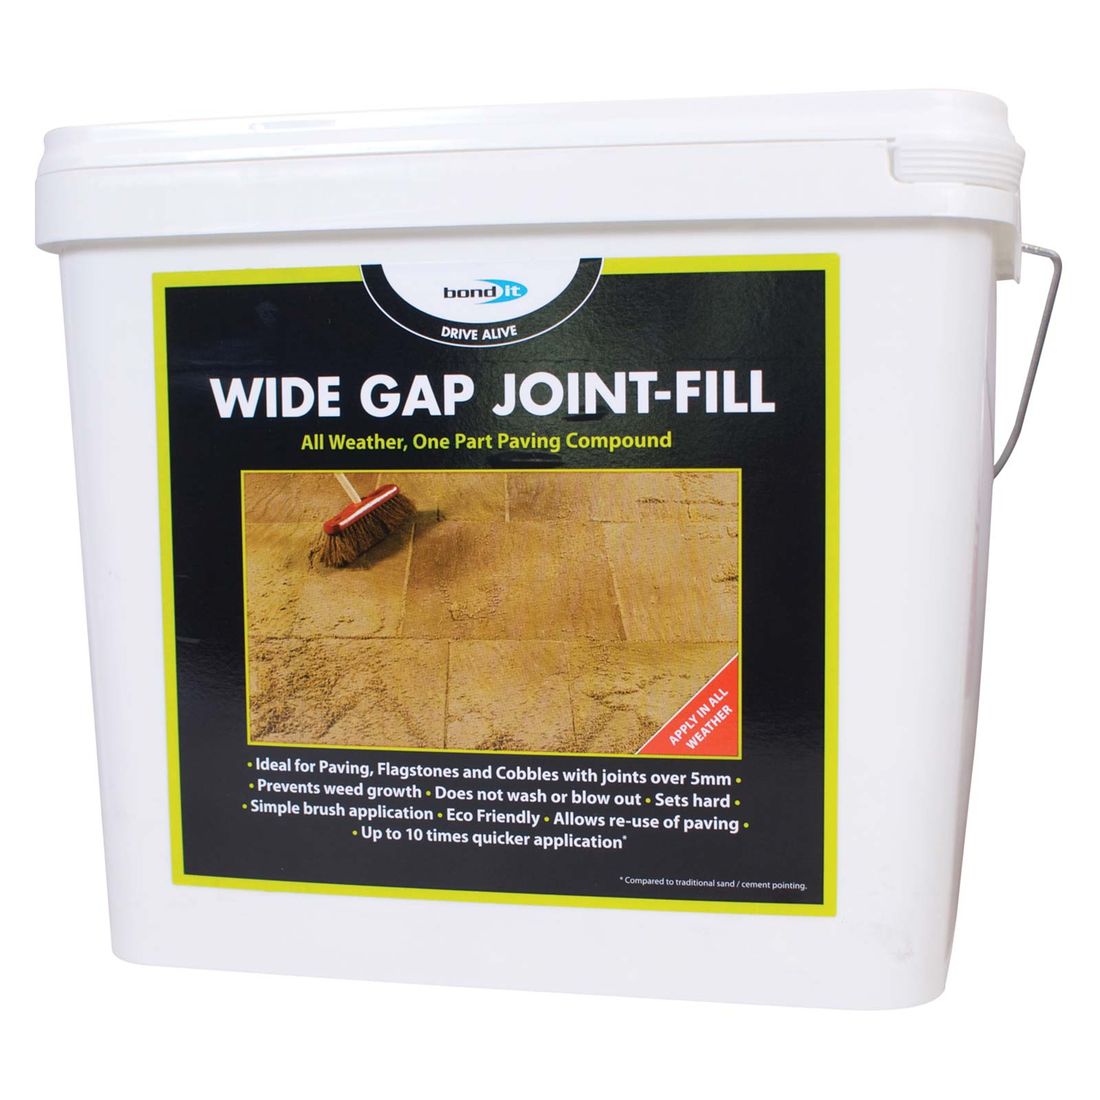 Drivealive Wide Gap Joint-Fill Paving Compound Grey 12Kg